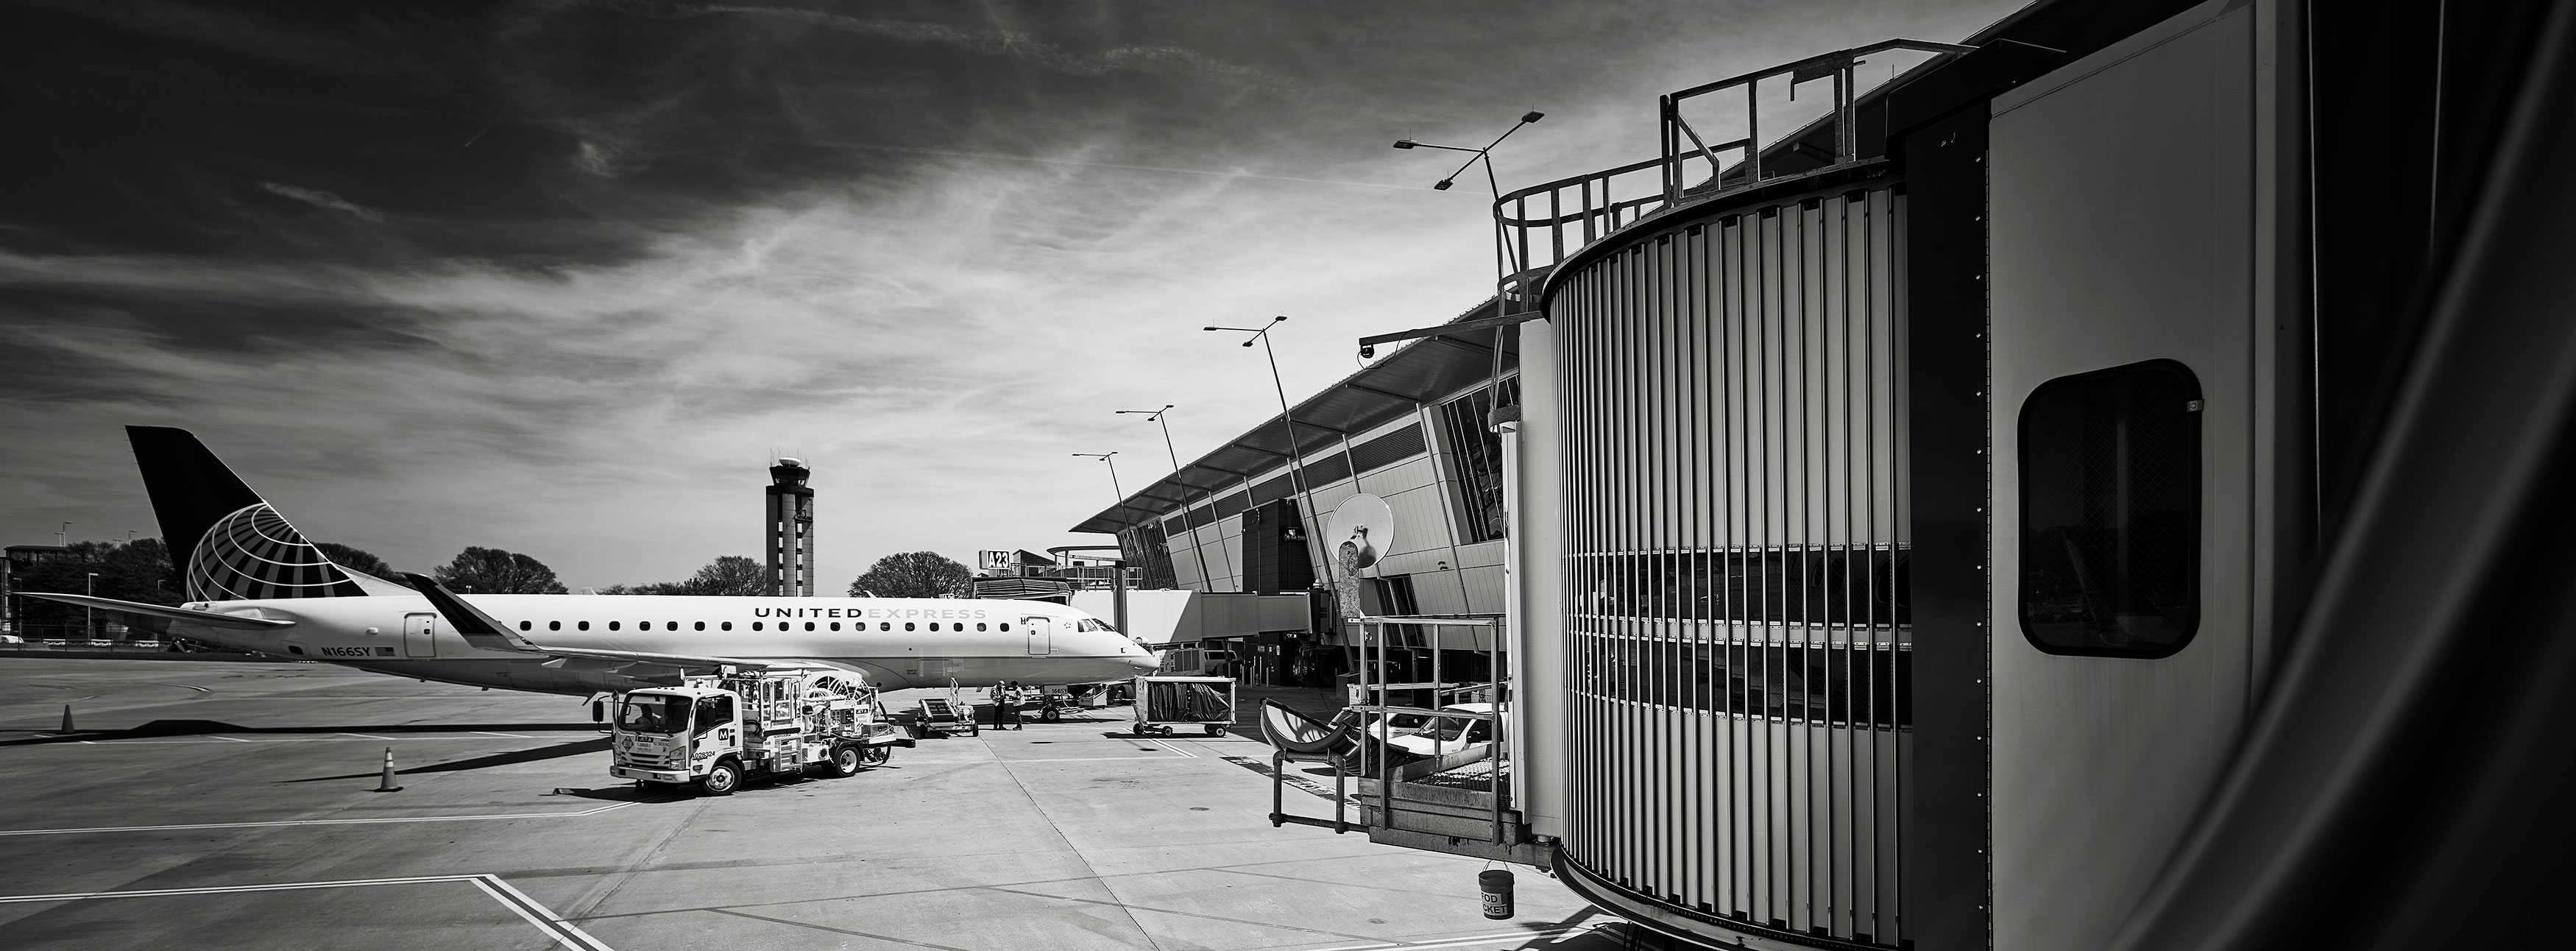 Travel_PANO_GS_202204_M1000483_BW_3500px